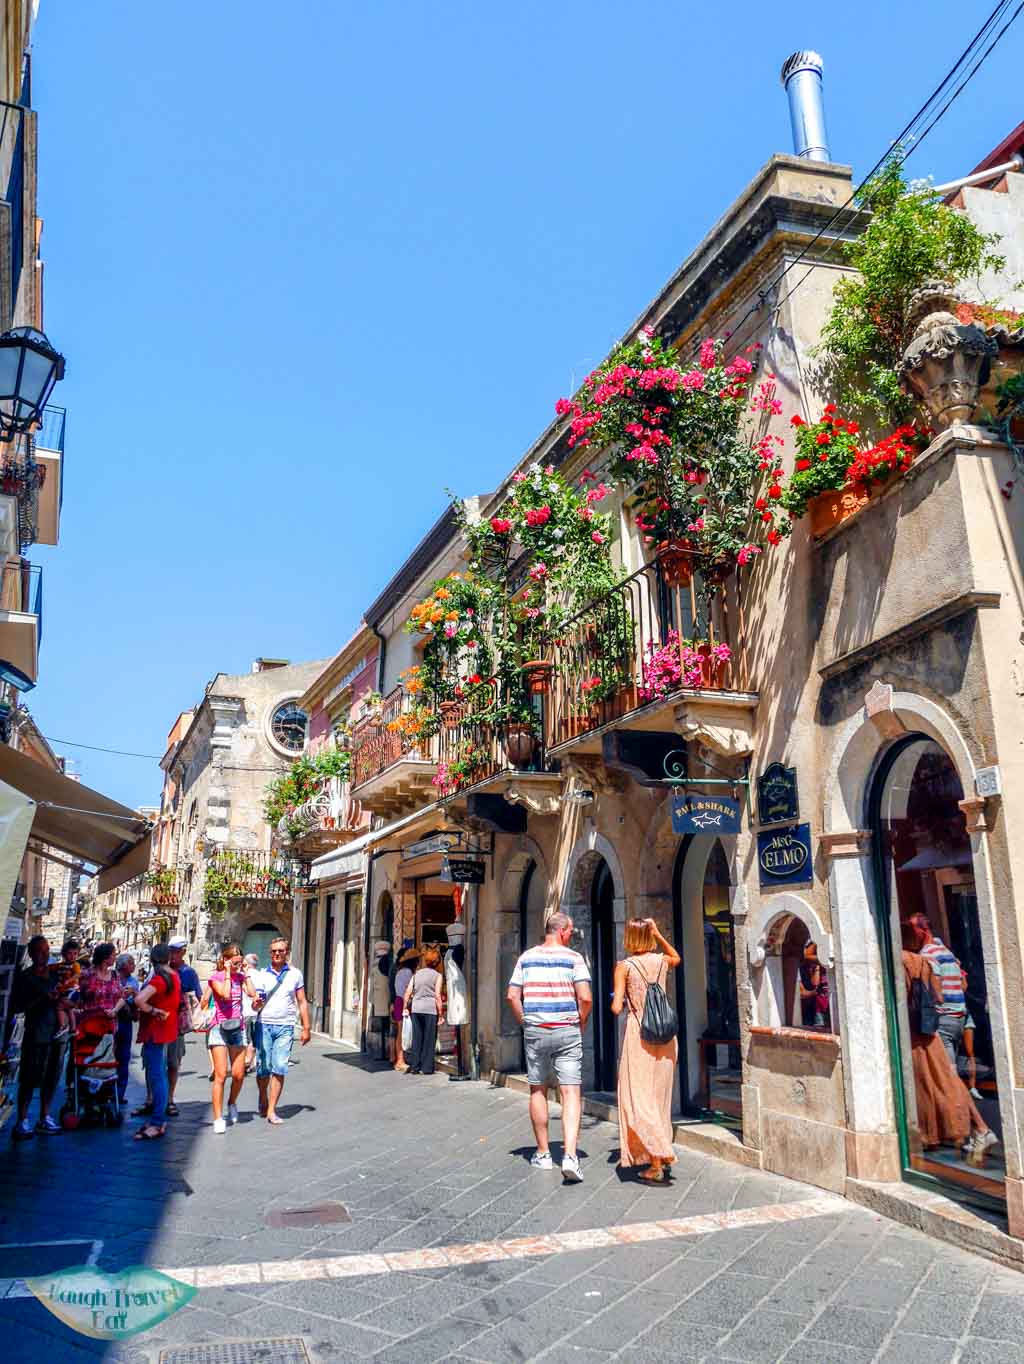 Walking in the old town of Taormina, Sicily | Laugh Travel Eat